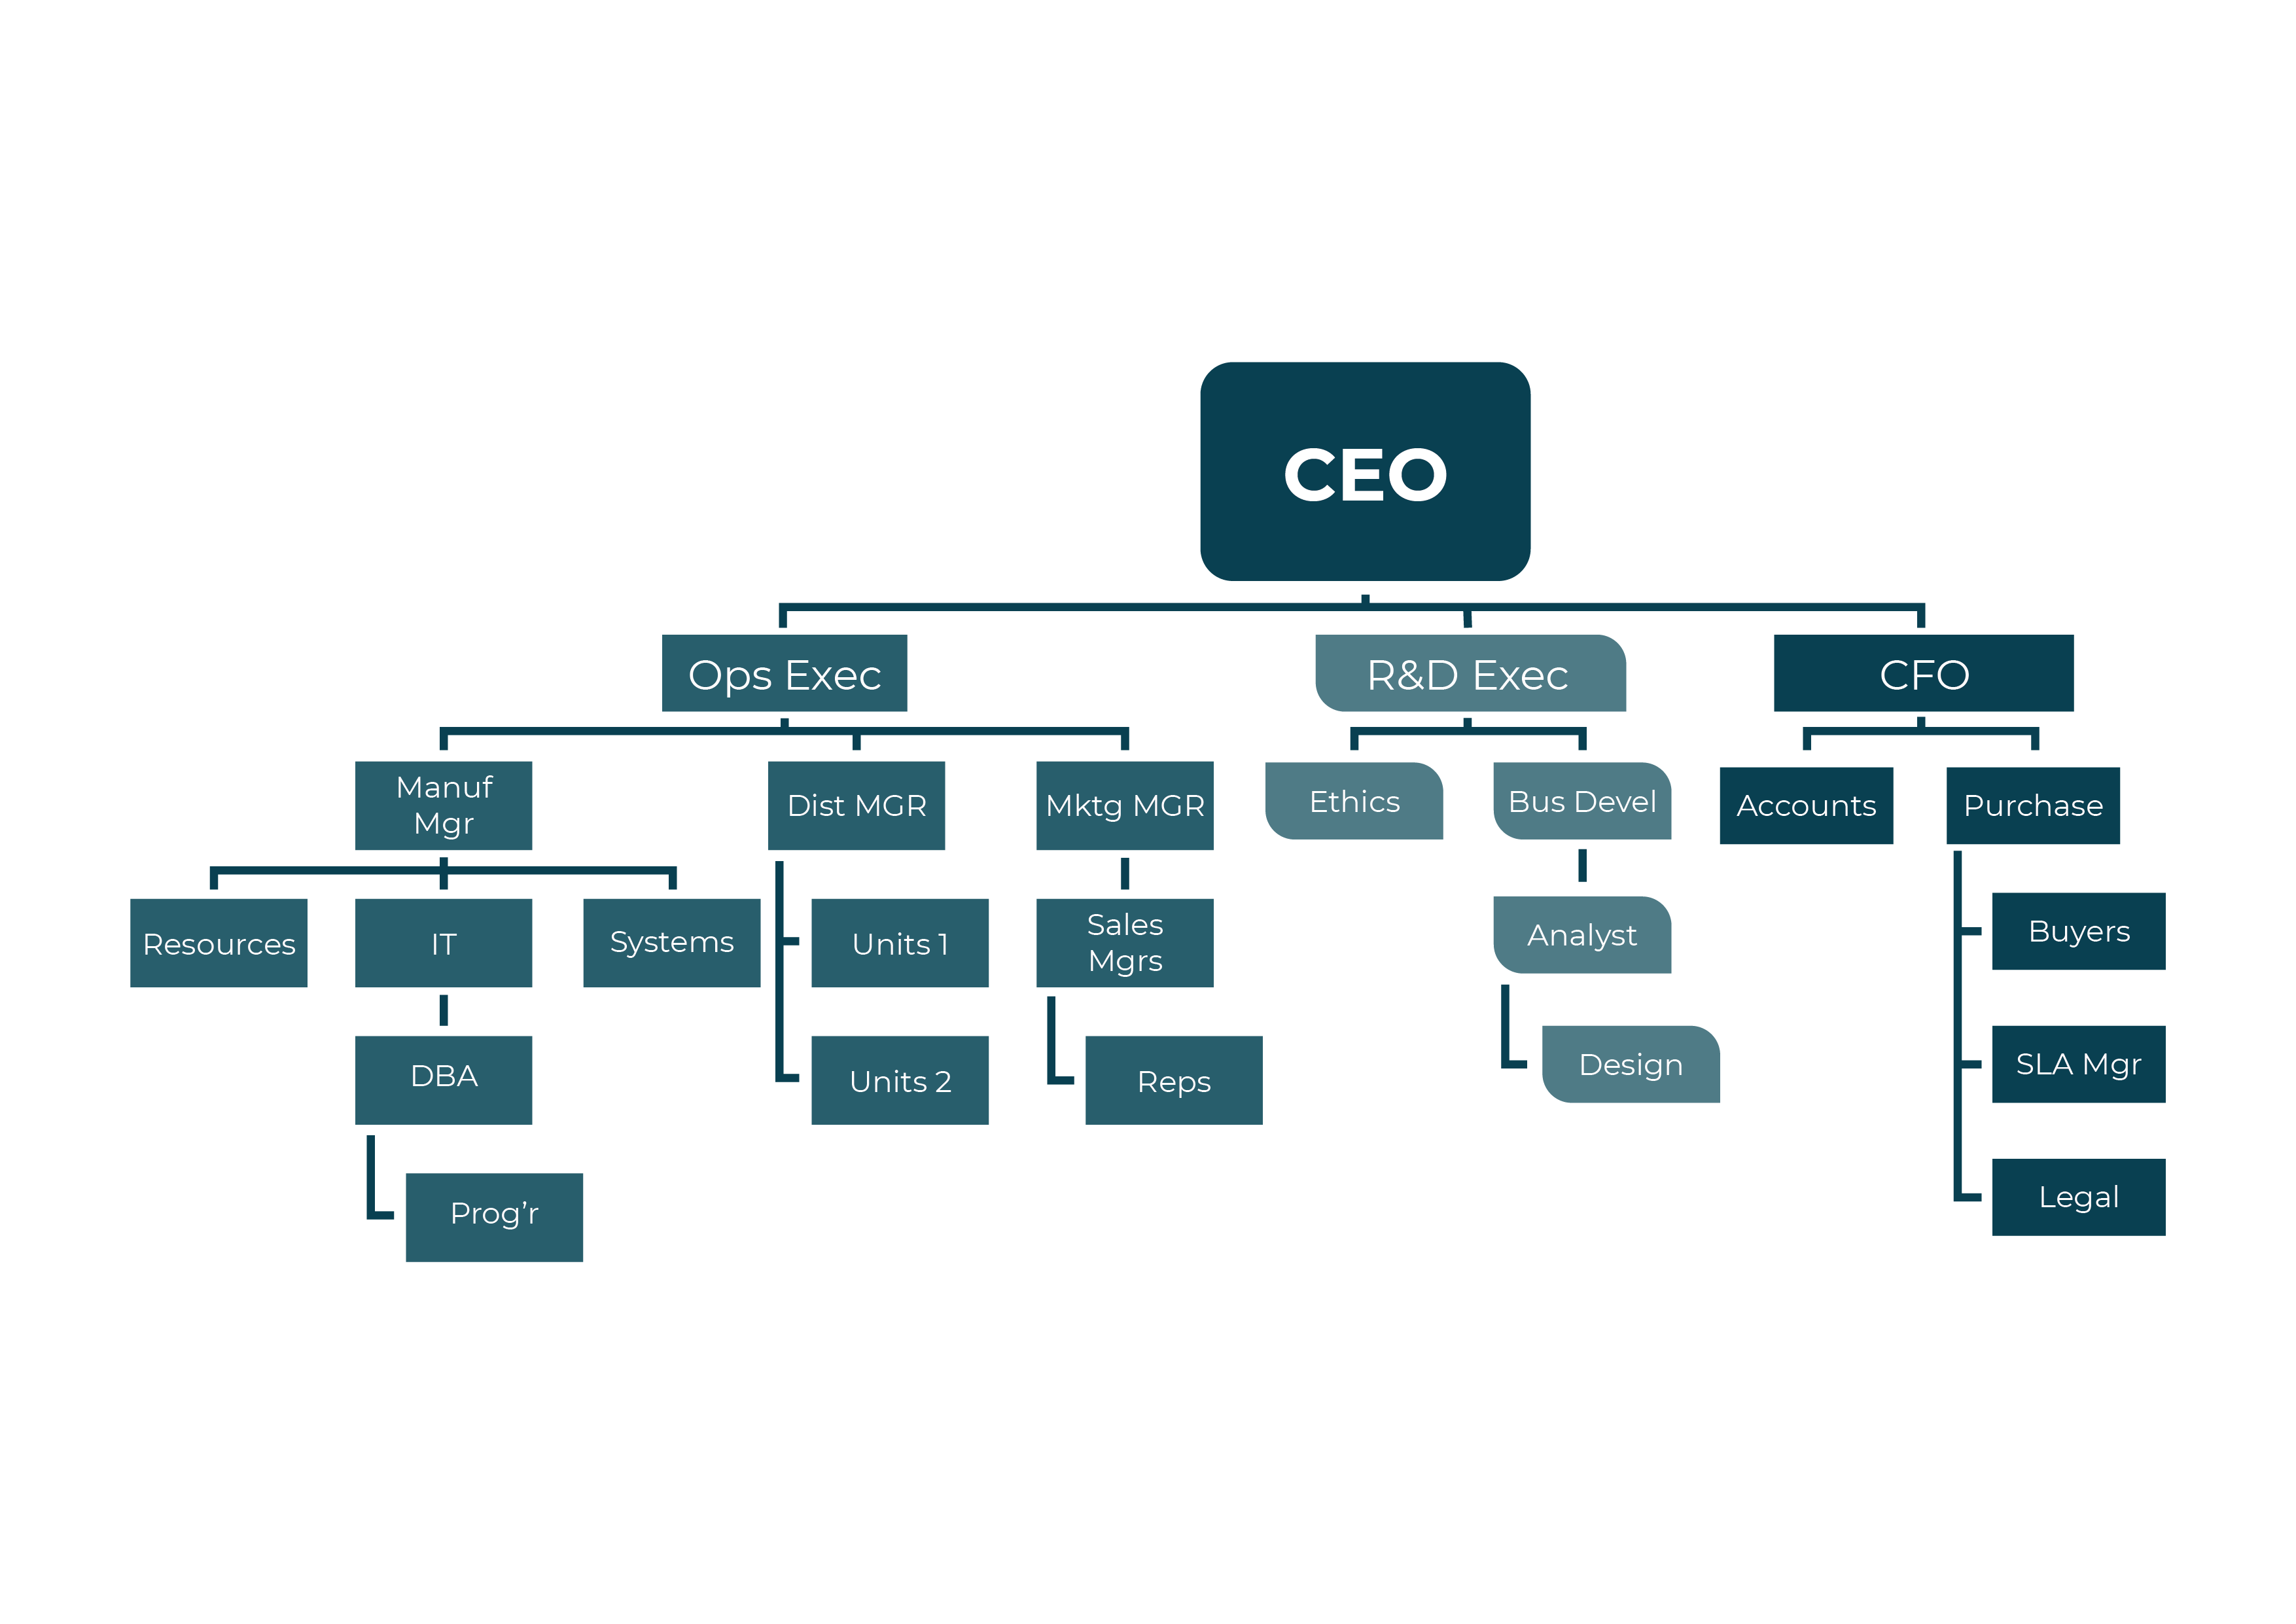 An example organisation breakdown structure